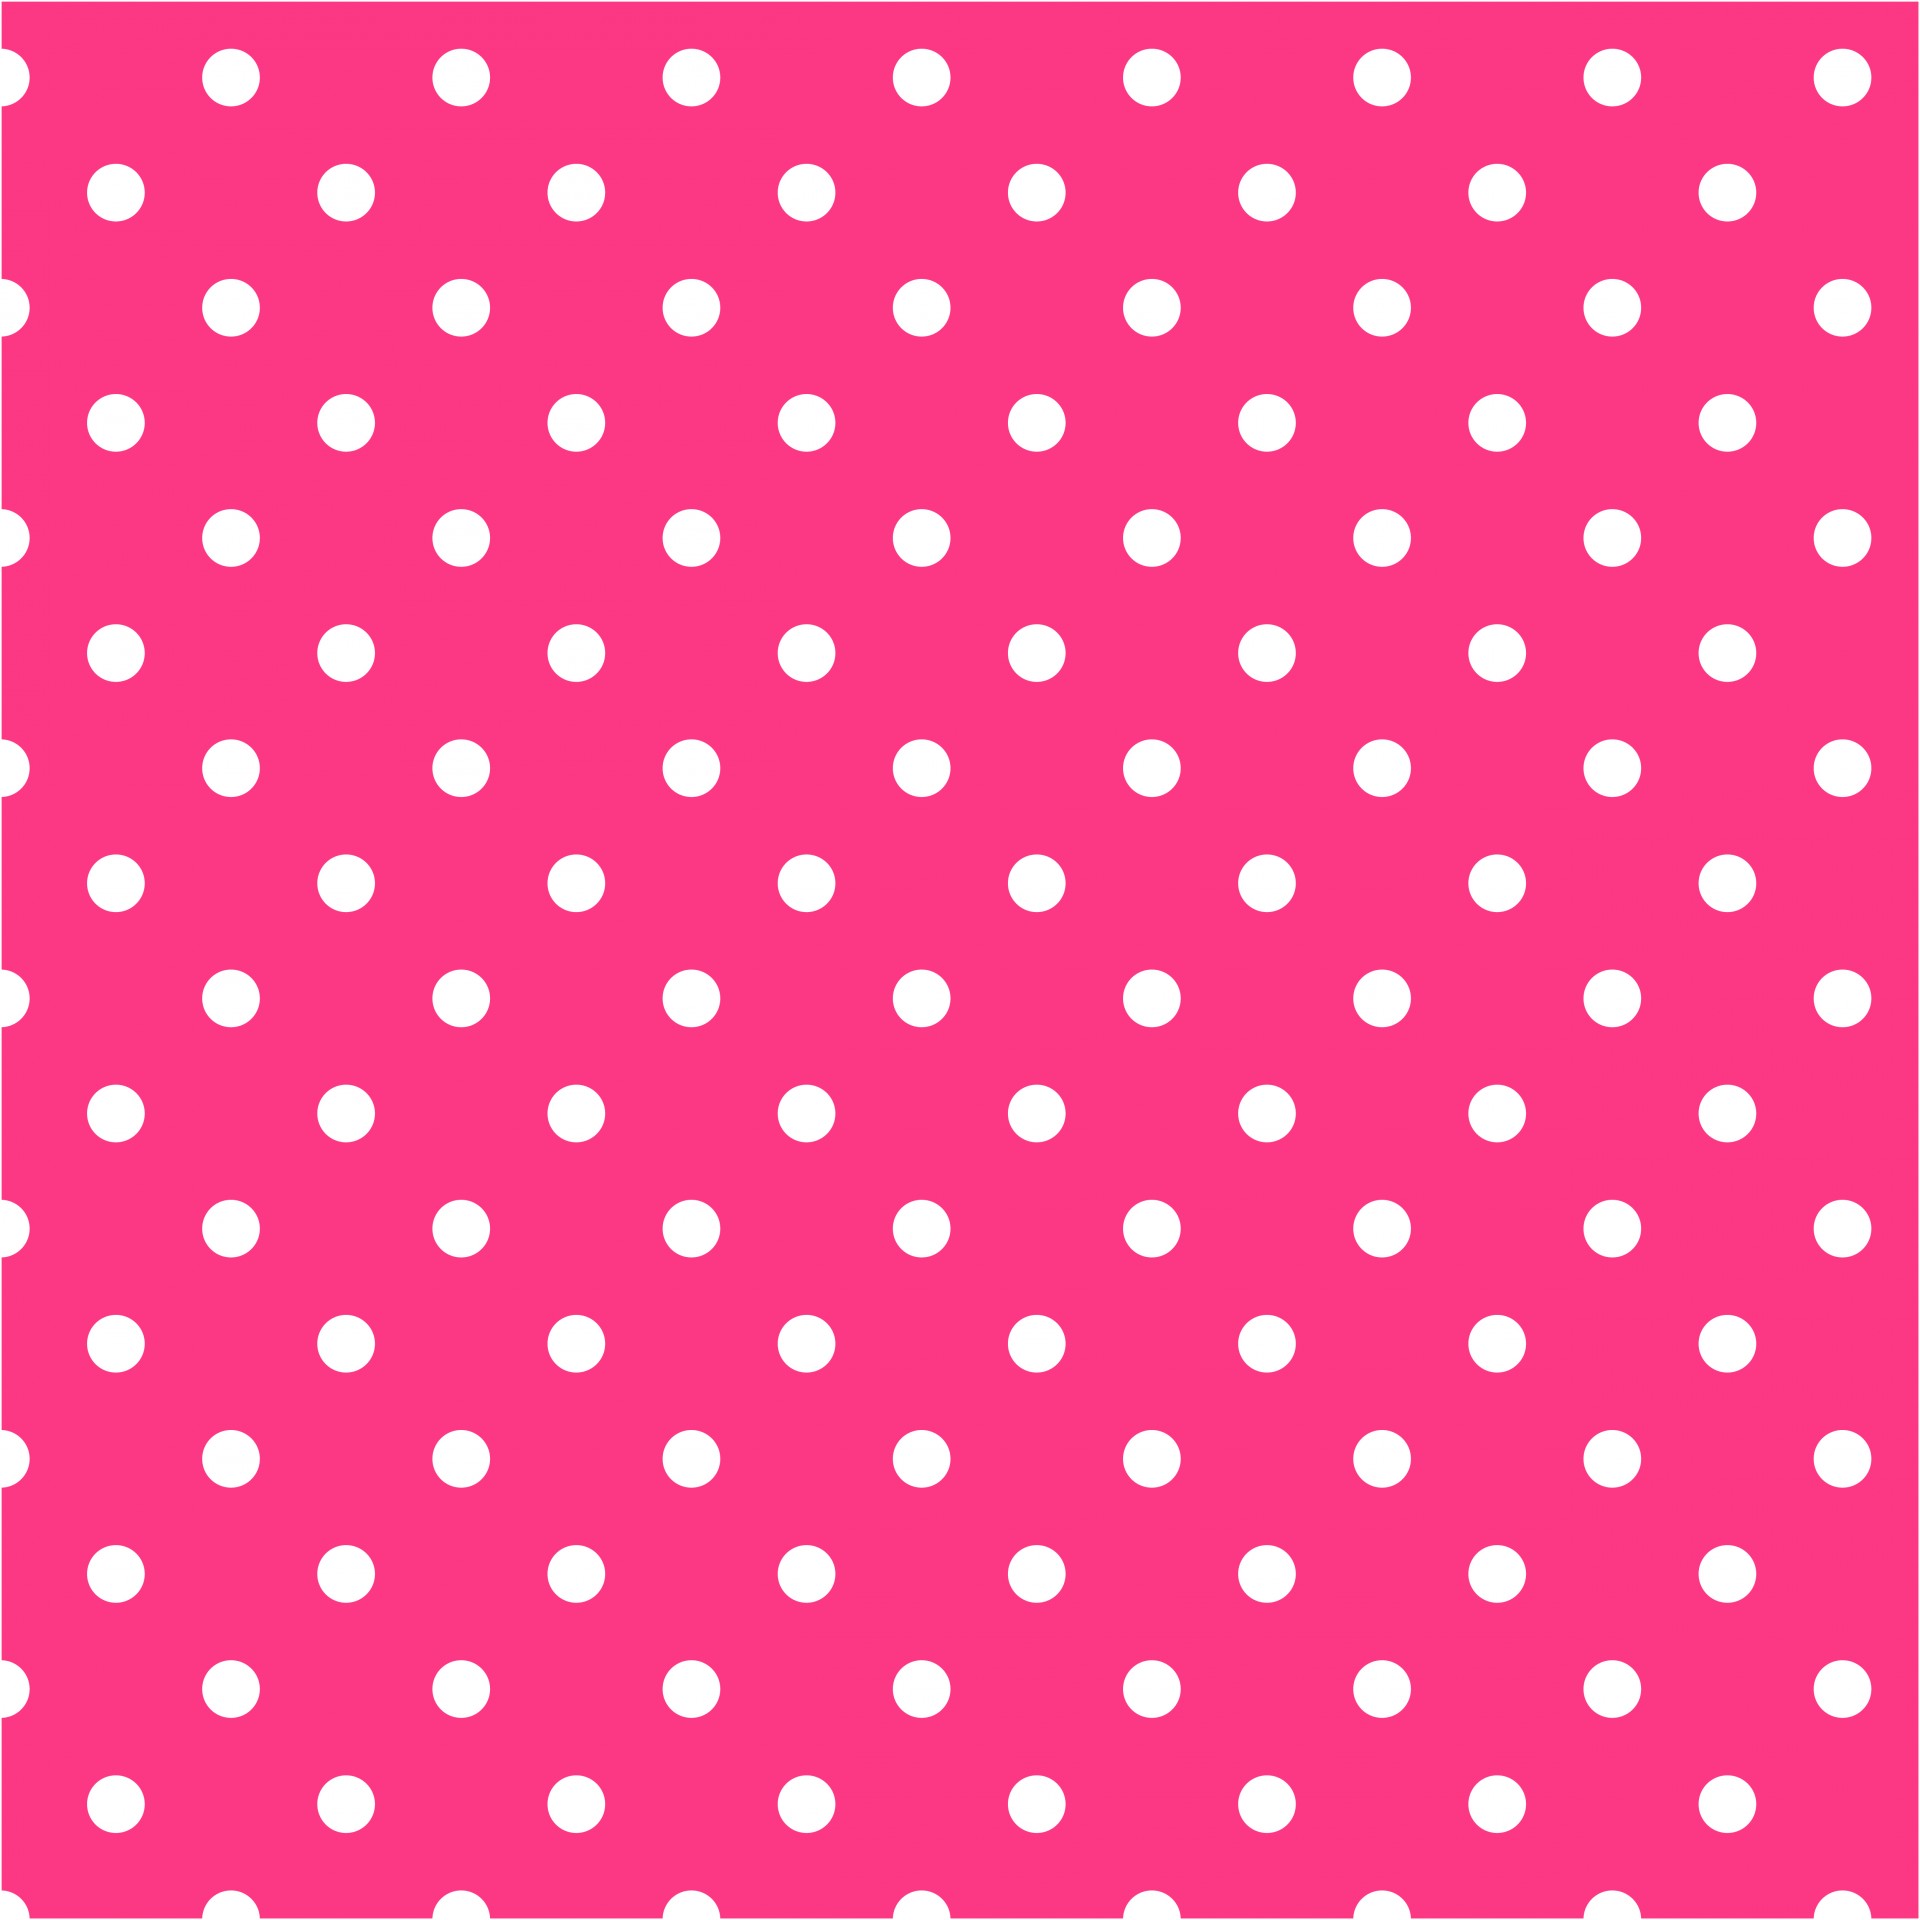 White polka dots on bright hot pink background for scrapbooking